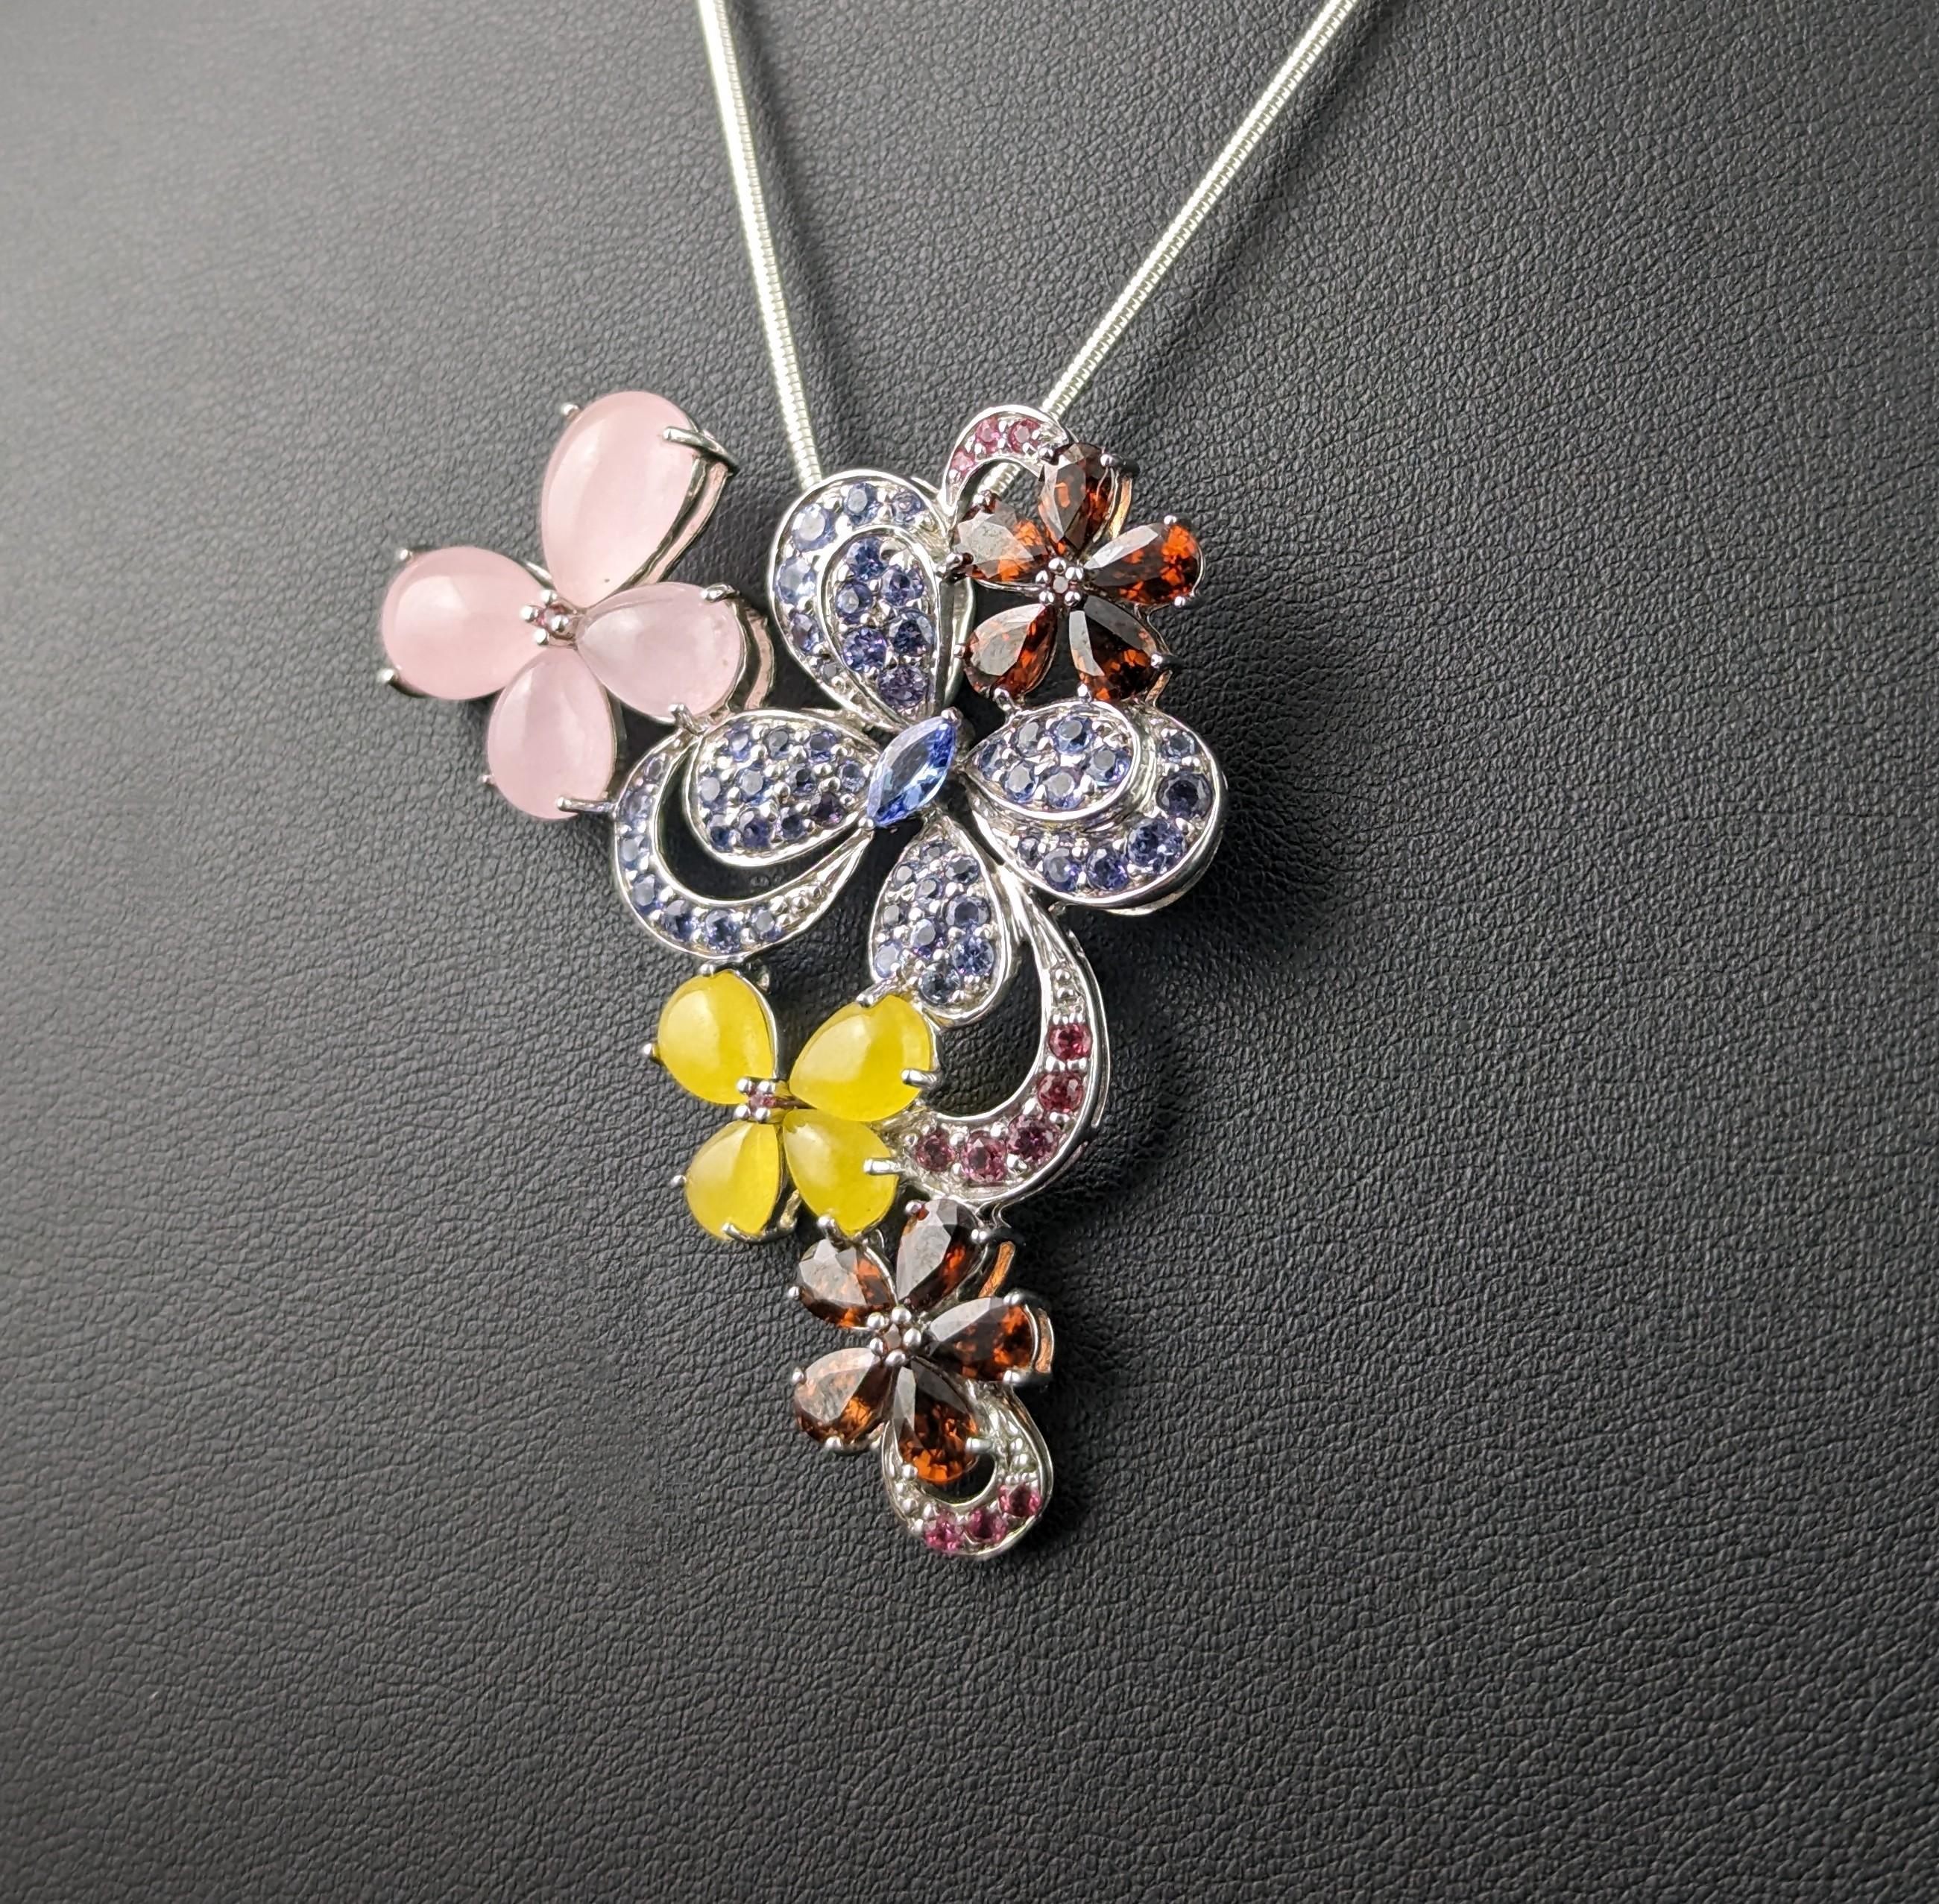 Vintage sterling silver and gem set pendant, Butterflies and Flowers necklace For Sale 3